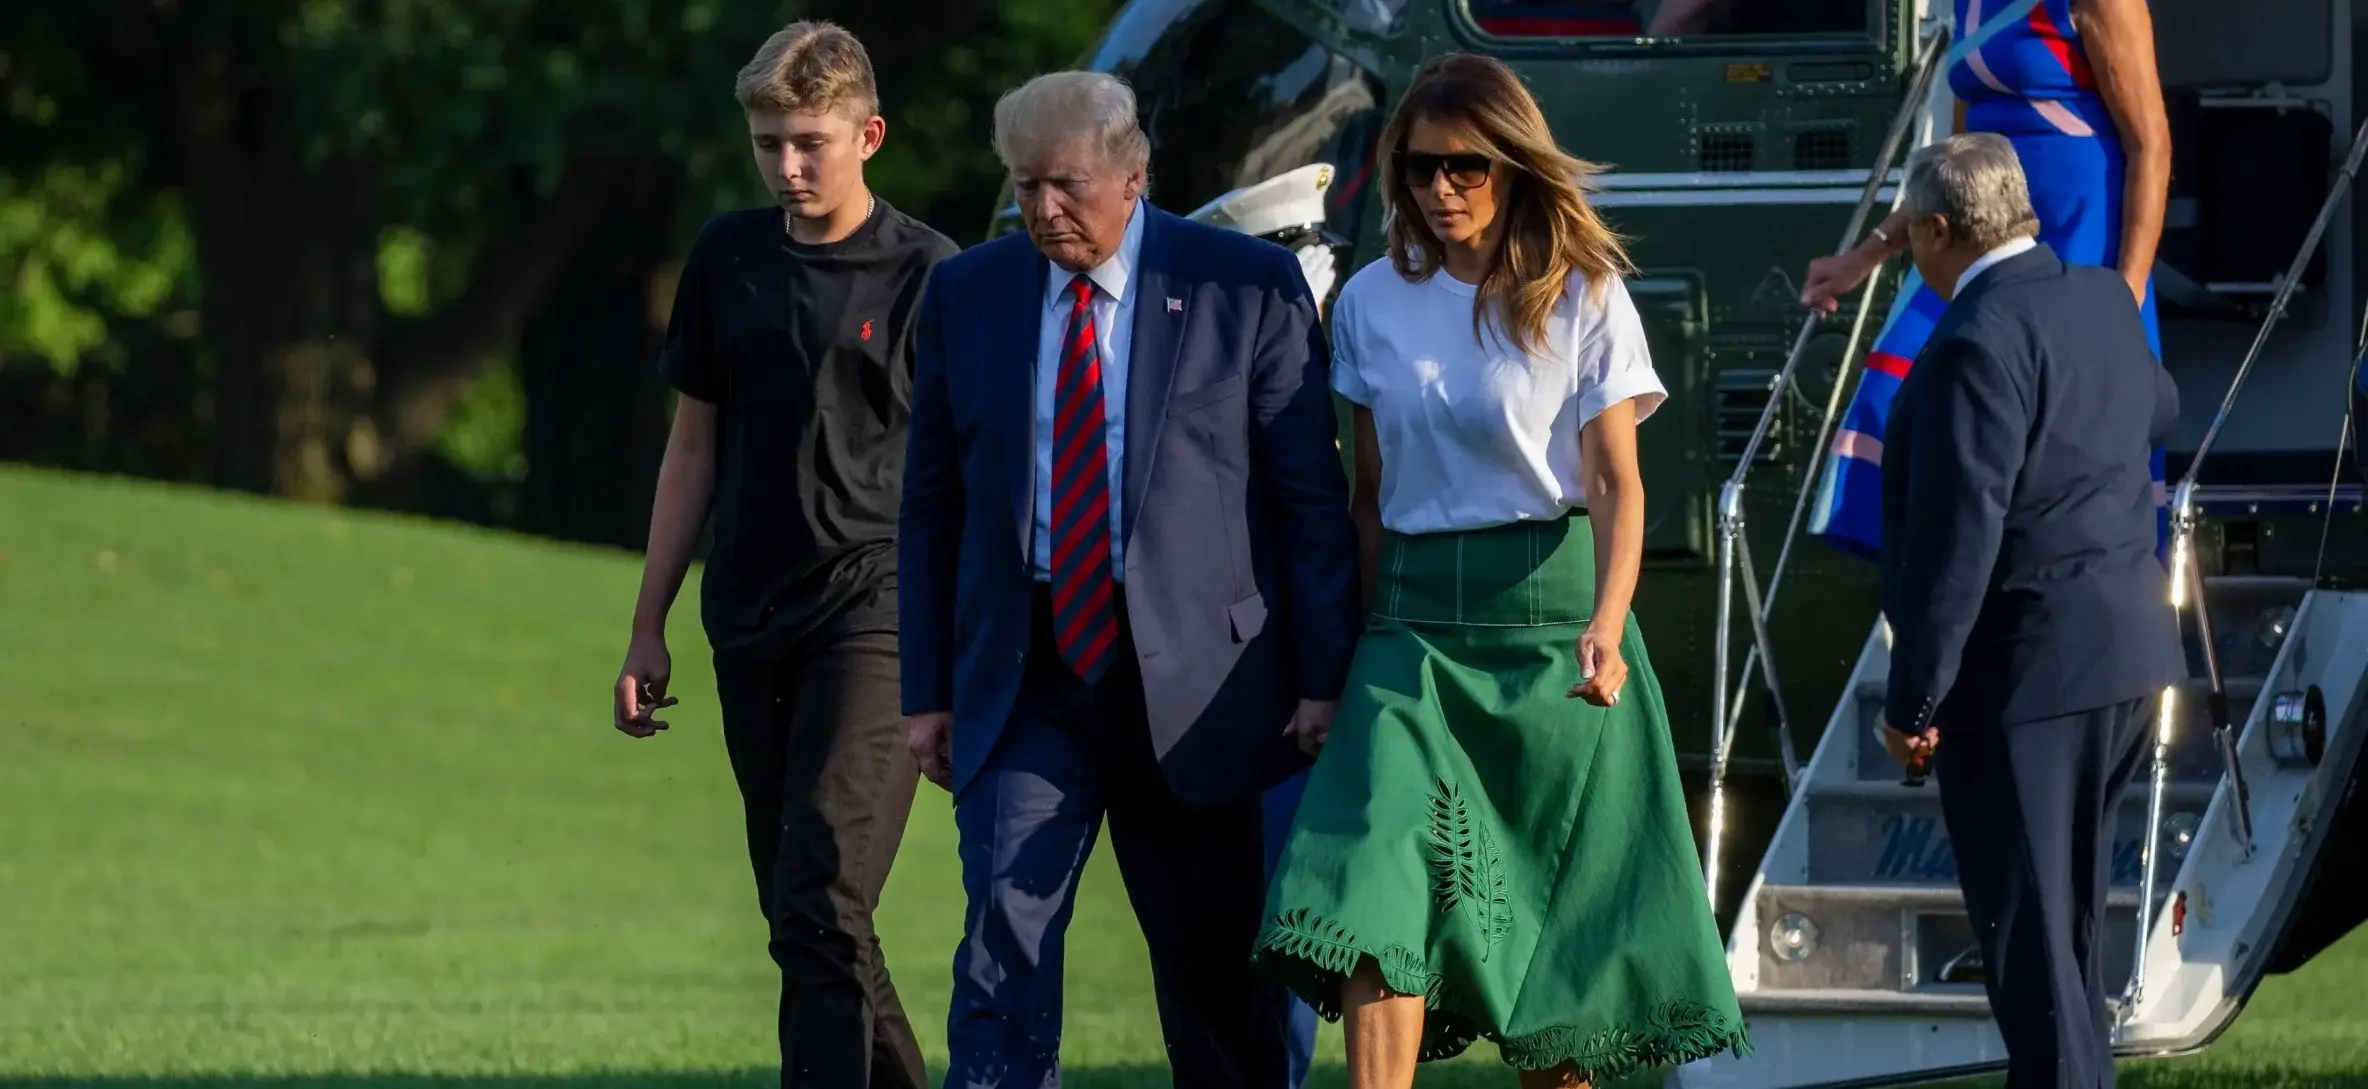 Melania Trump Prefers To Be With Son Barron Over Participating In Husband Donald Trump’s Politics